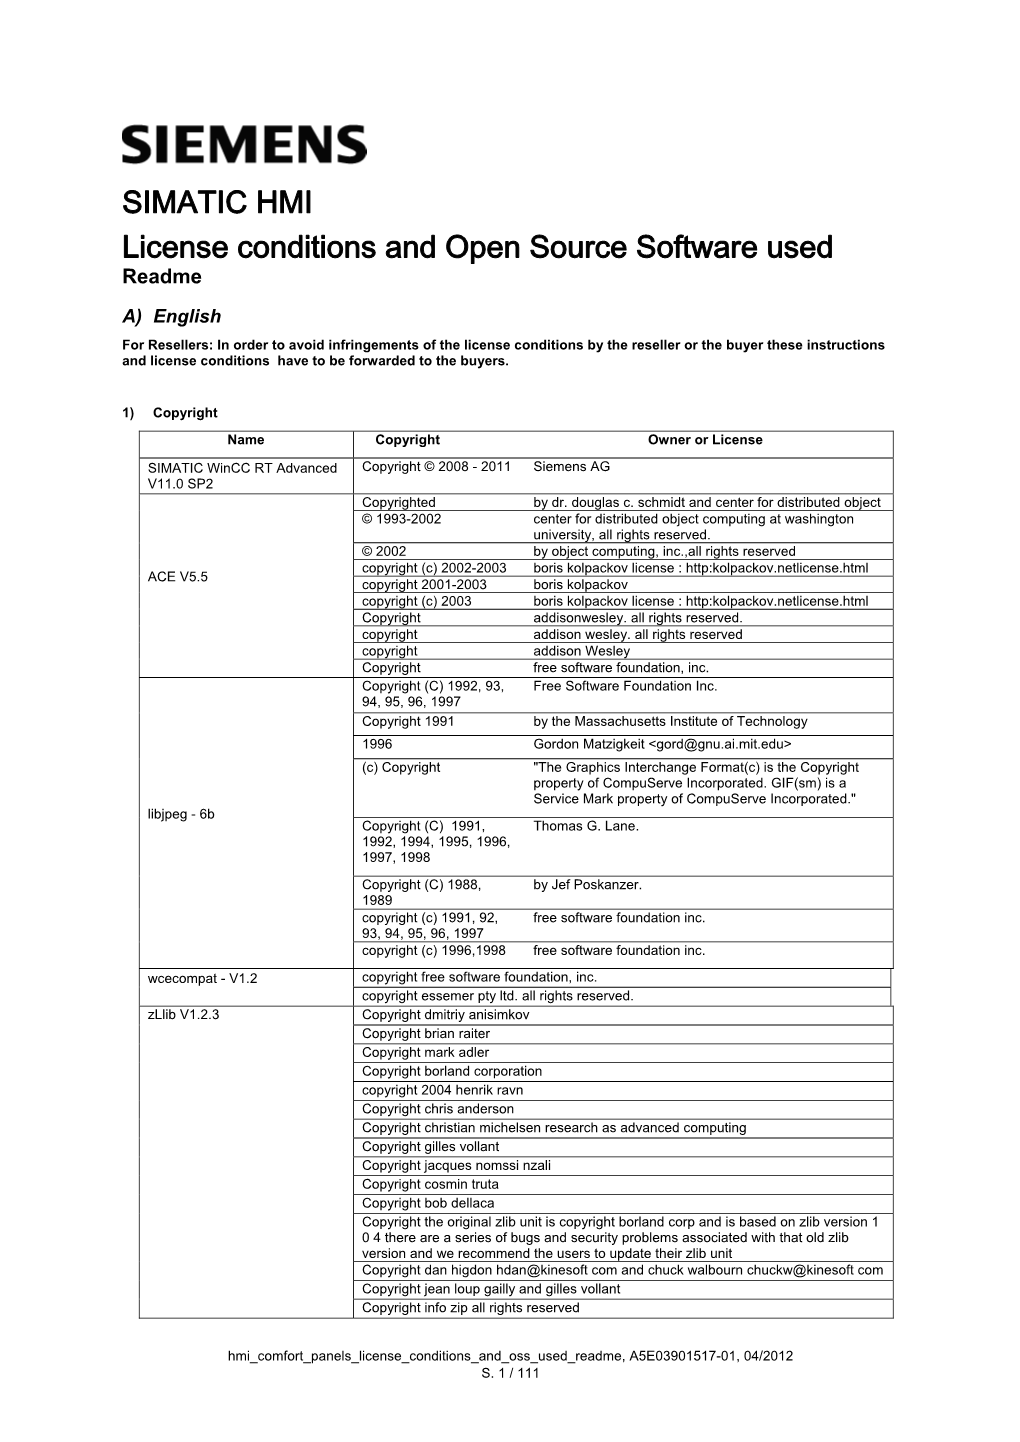 License Conditions and Open Source Software Used Readme